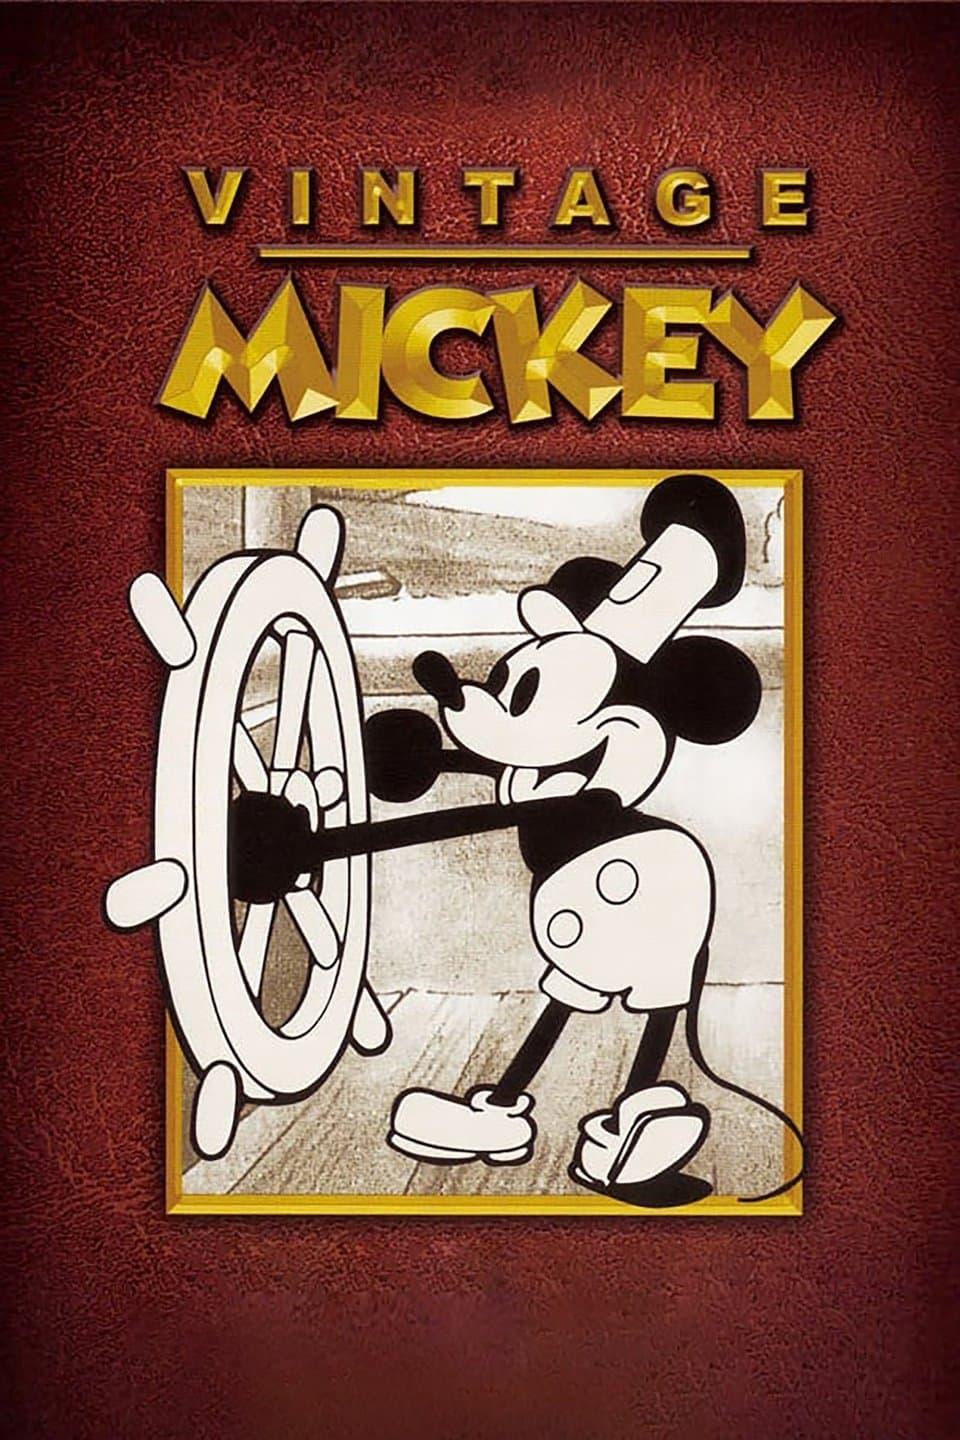 Vintage Mickey poster